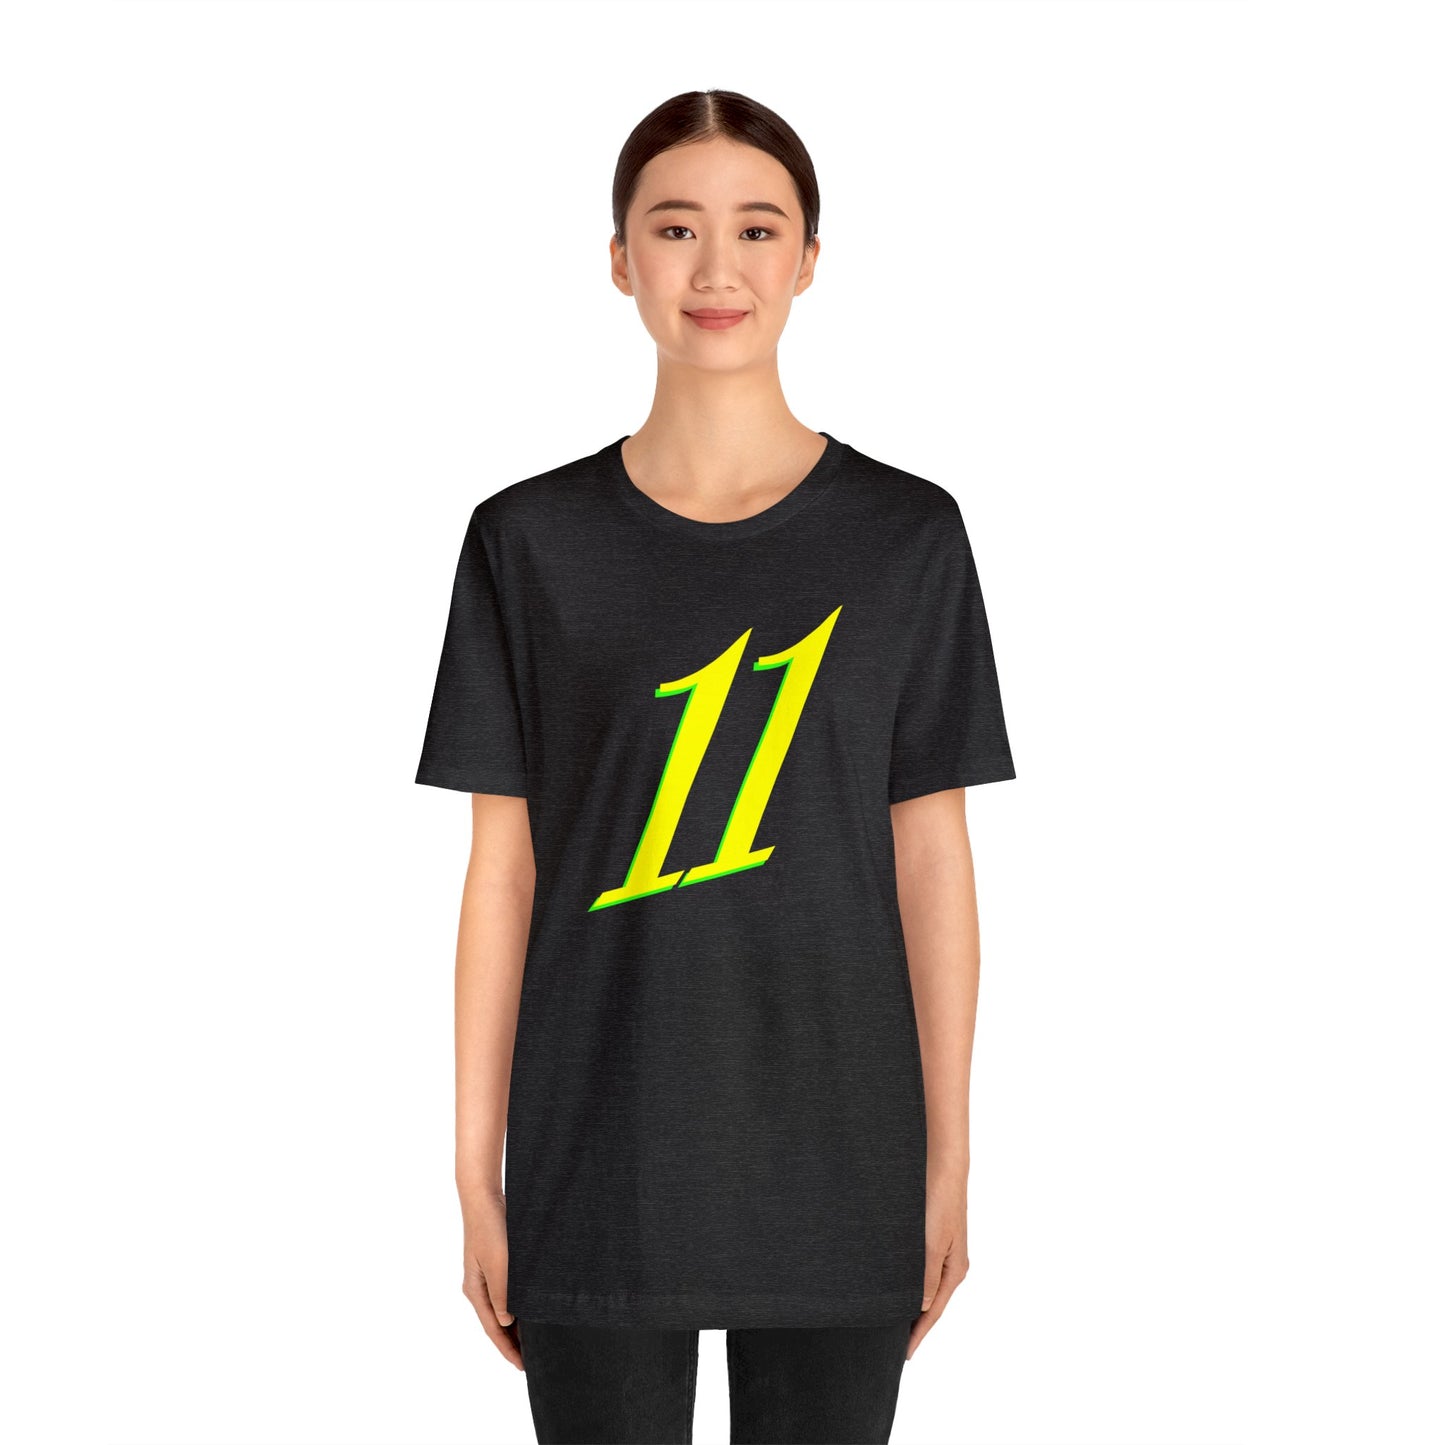 Number 11 Design - Soft Cotton Tee for birthdays and celebrations, Gift for friends and family, Multiple Options by clothezy.com in Asphalt Size Medium - Buy Now